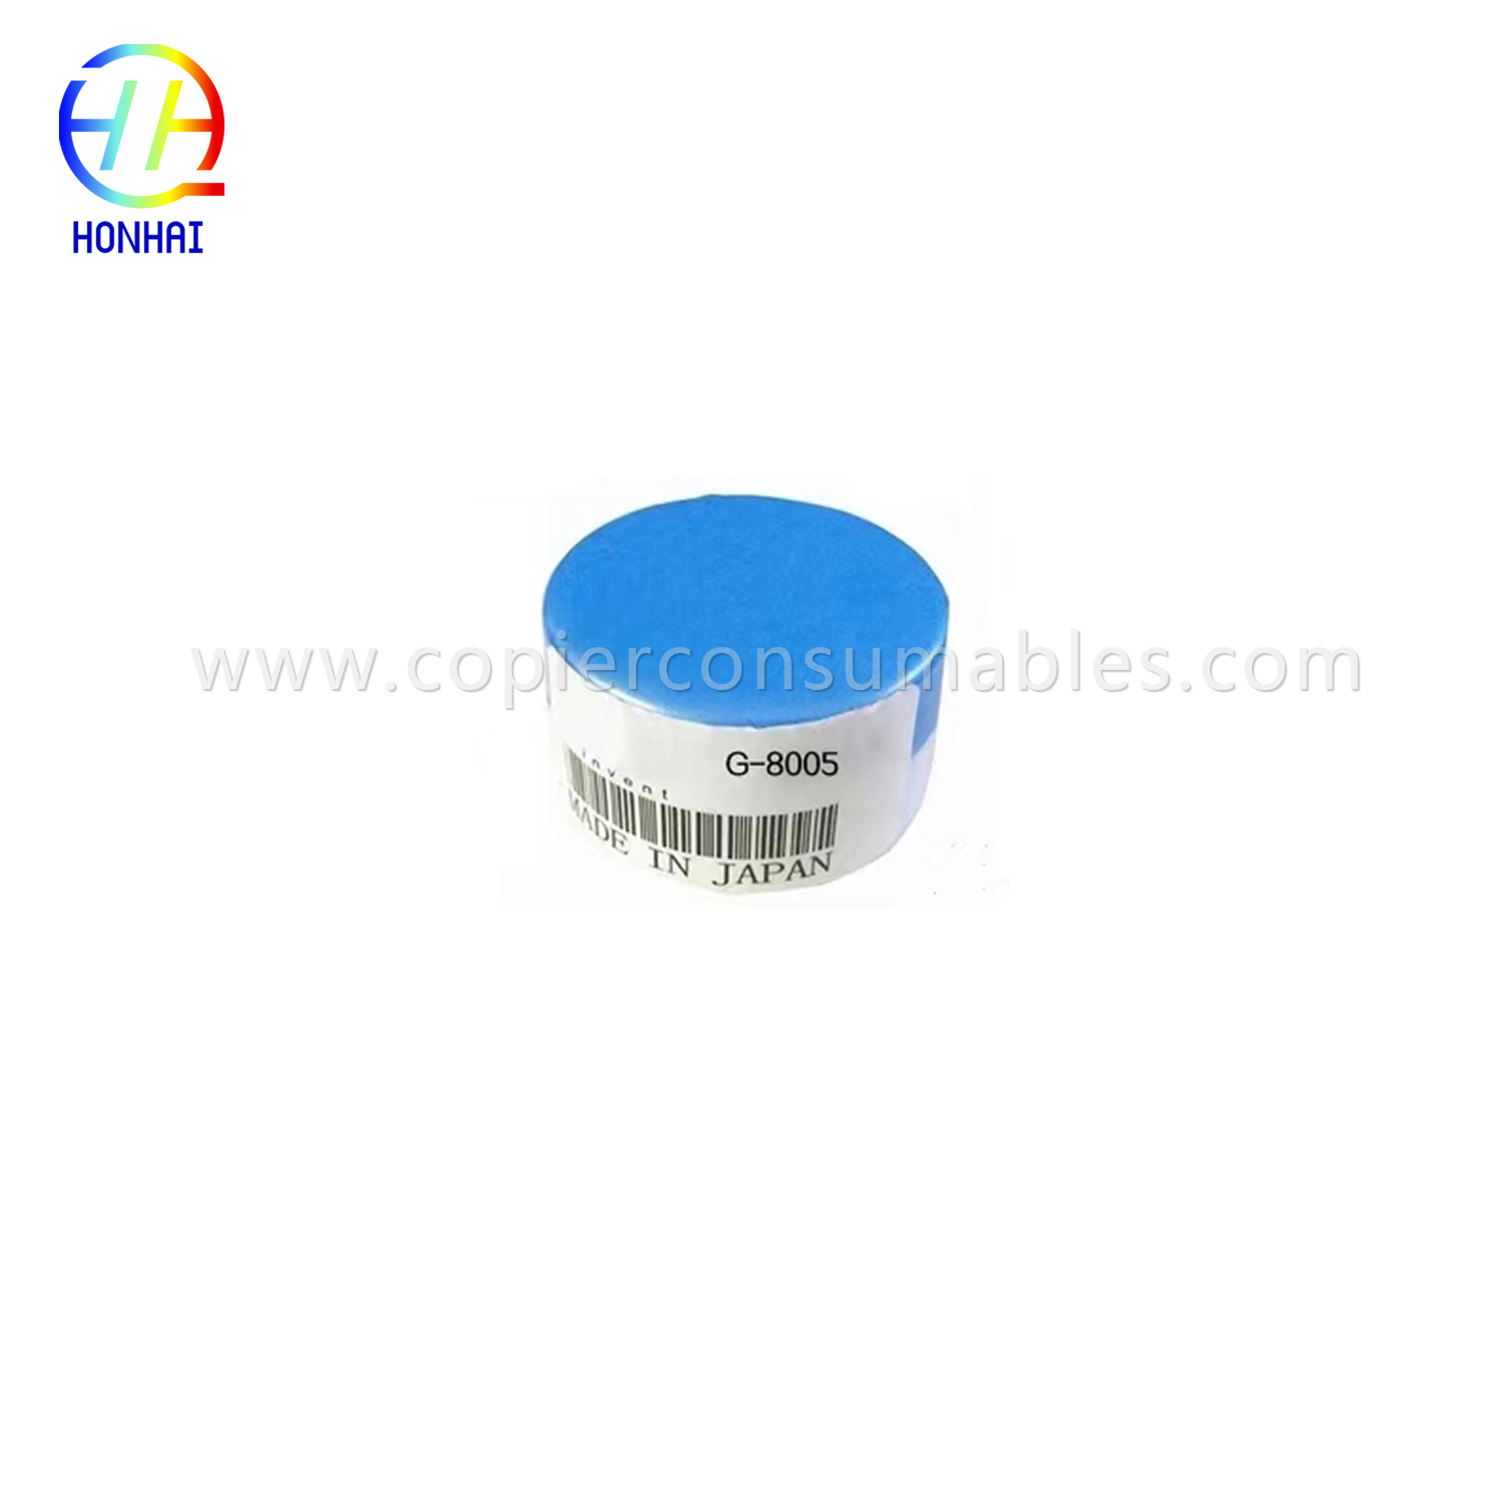 Grease for HP Laserjet G-8005 500g All HP